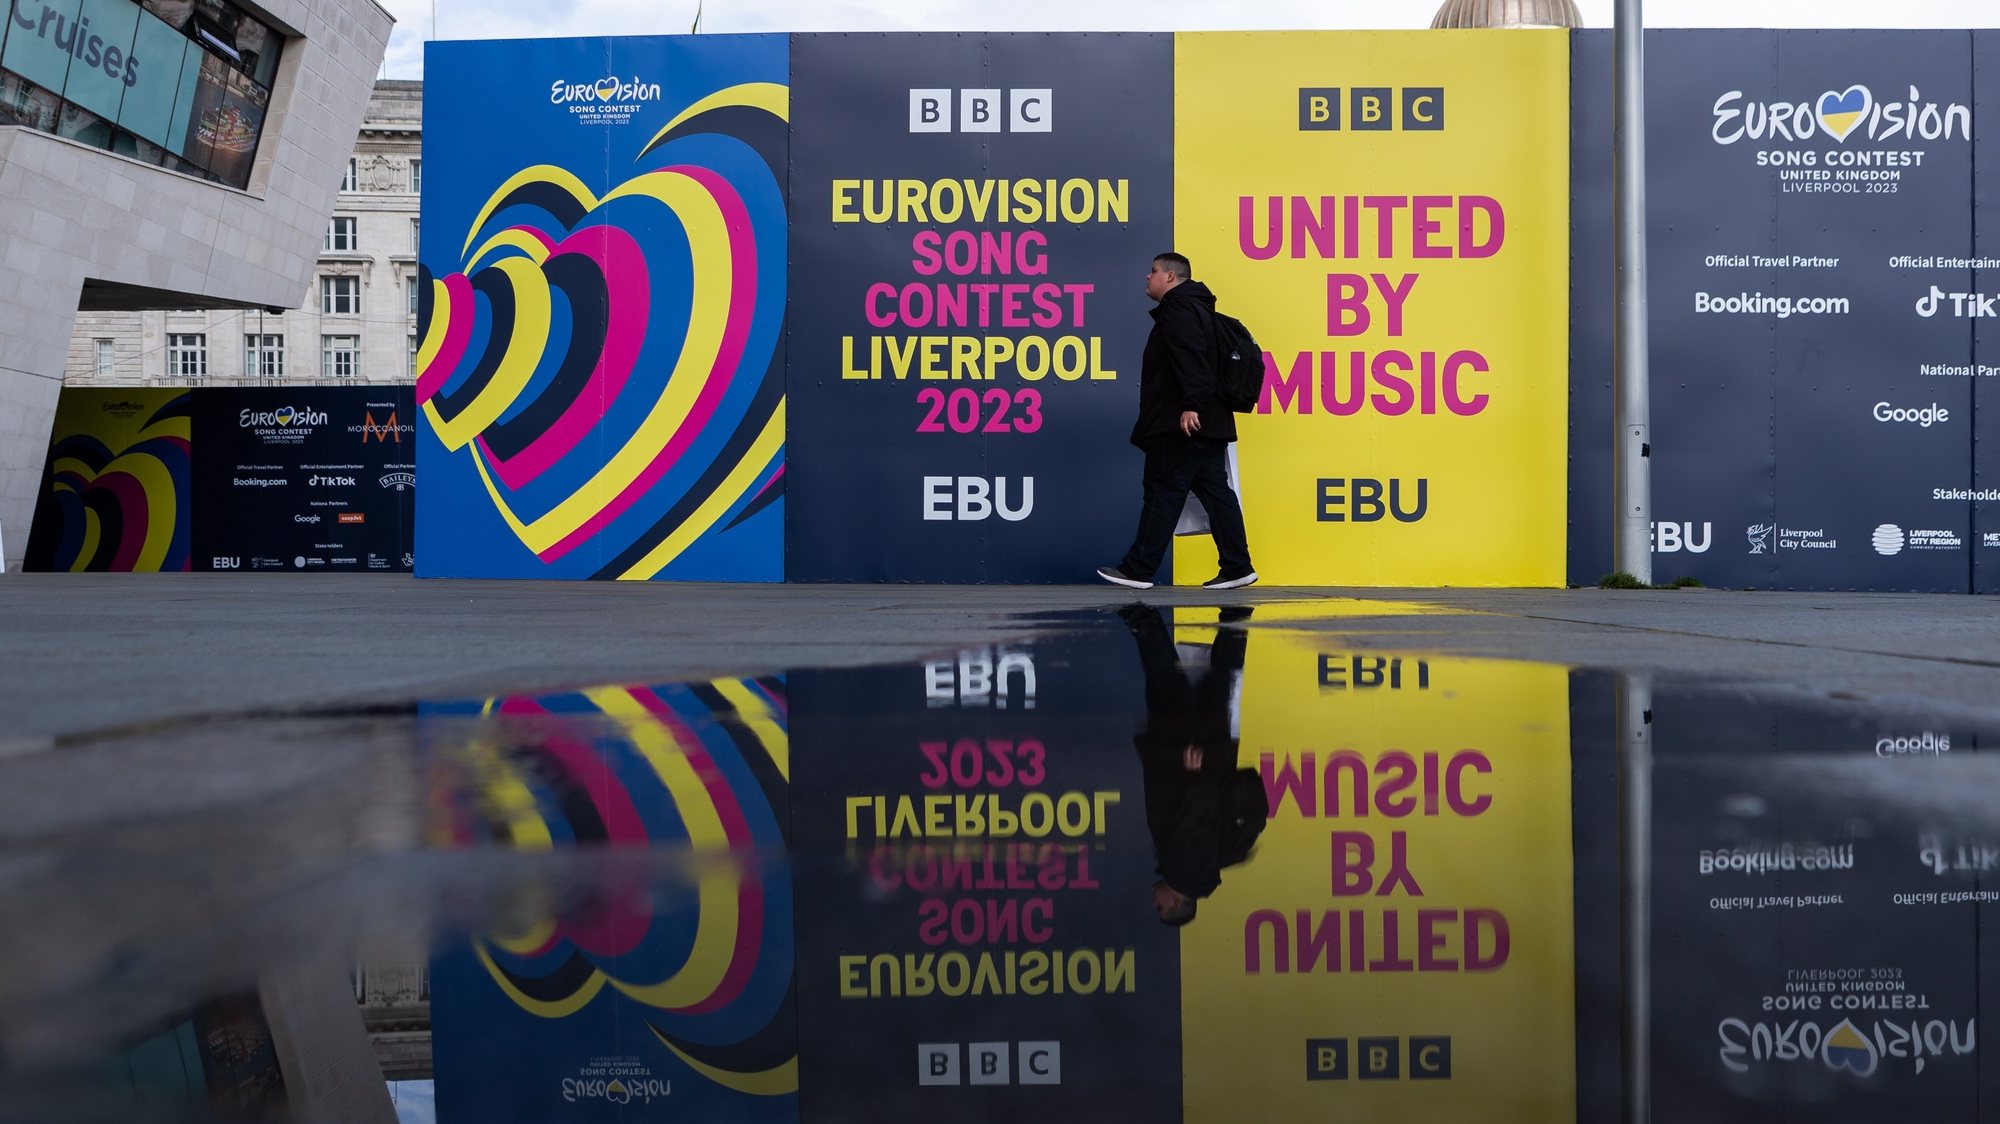 epa10610780 A person walks past Eurovision signs at the Pier Head in Liverpool, Britain, 05 May 2023. Liverpool is preparing to host the 2023 Eurovision Song Contest on behalf of Ukraine. The 67th edition of the Eurovision Song Contest (ESC) consists of two Semi-Finals, held on 09 and 11 May, and a Grand Final on 13 May 2023.  EPA/ADAM VAUGHAN